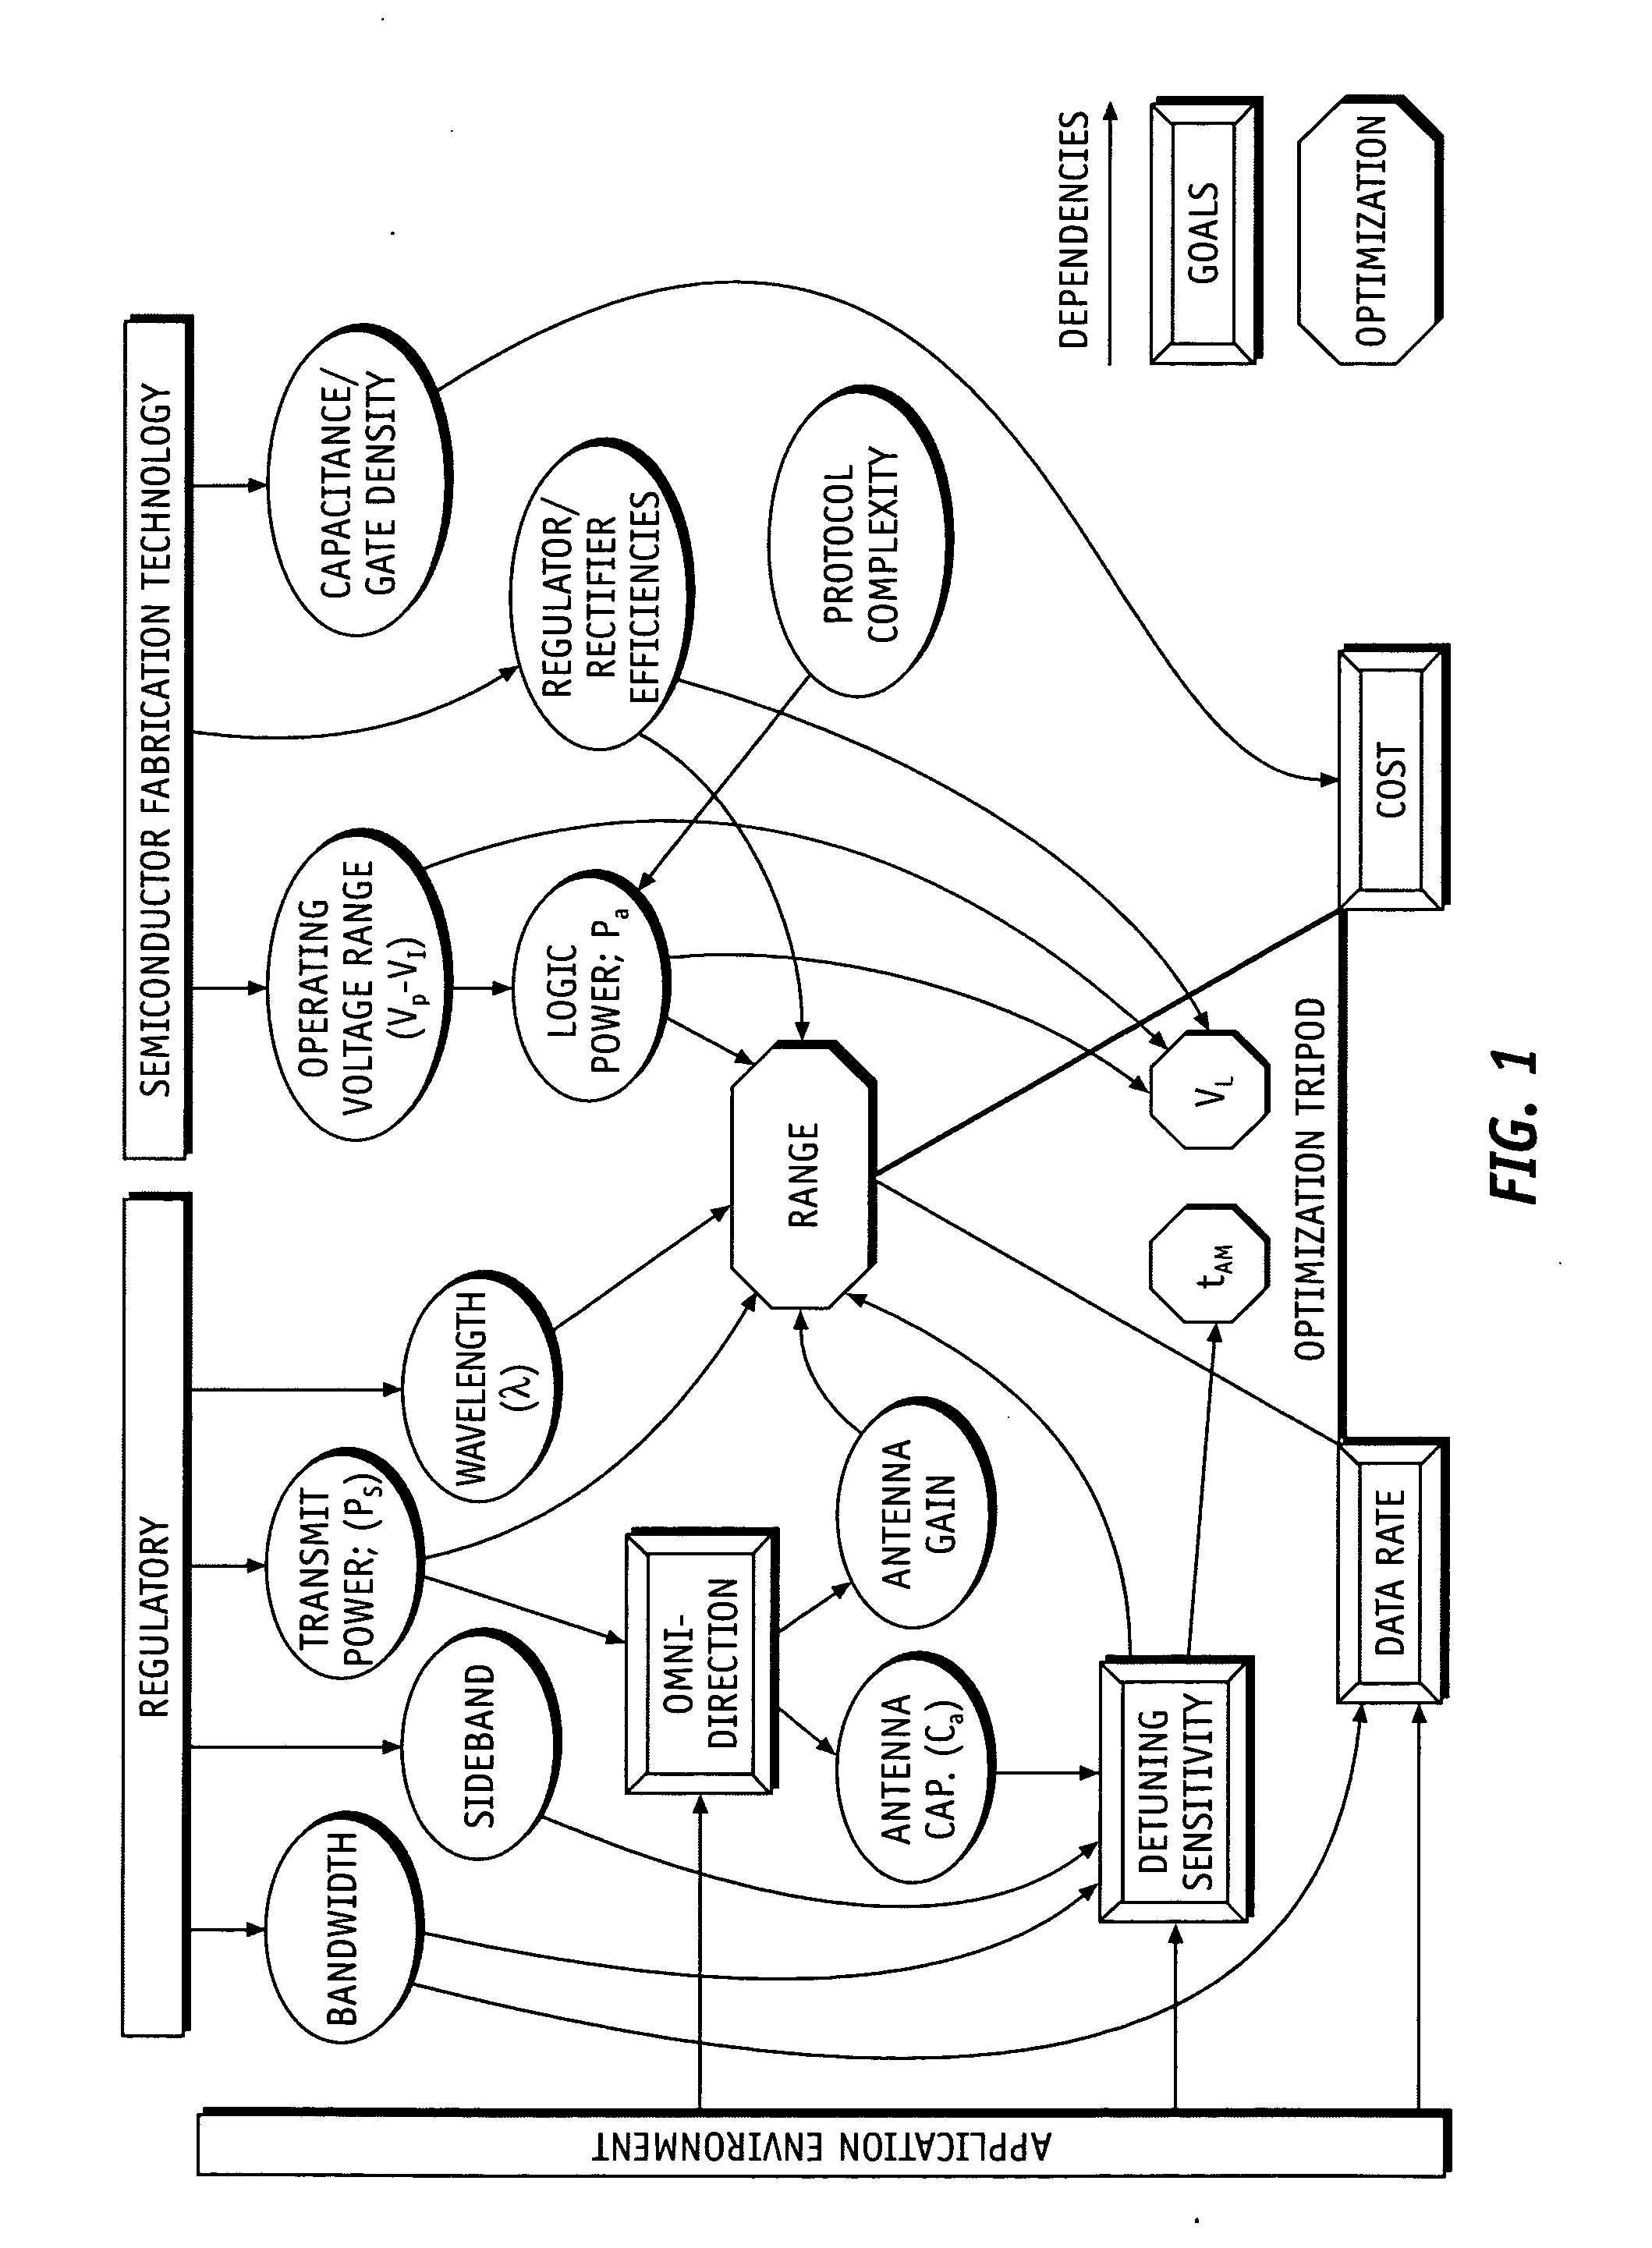 Method for optimizing the design and implementation of RFID tags